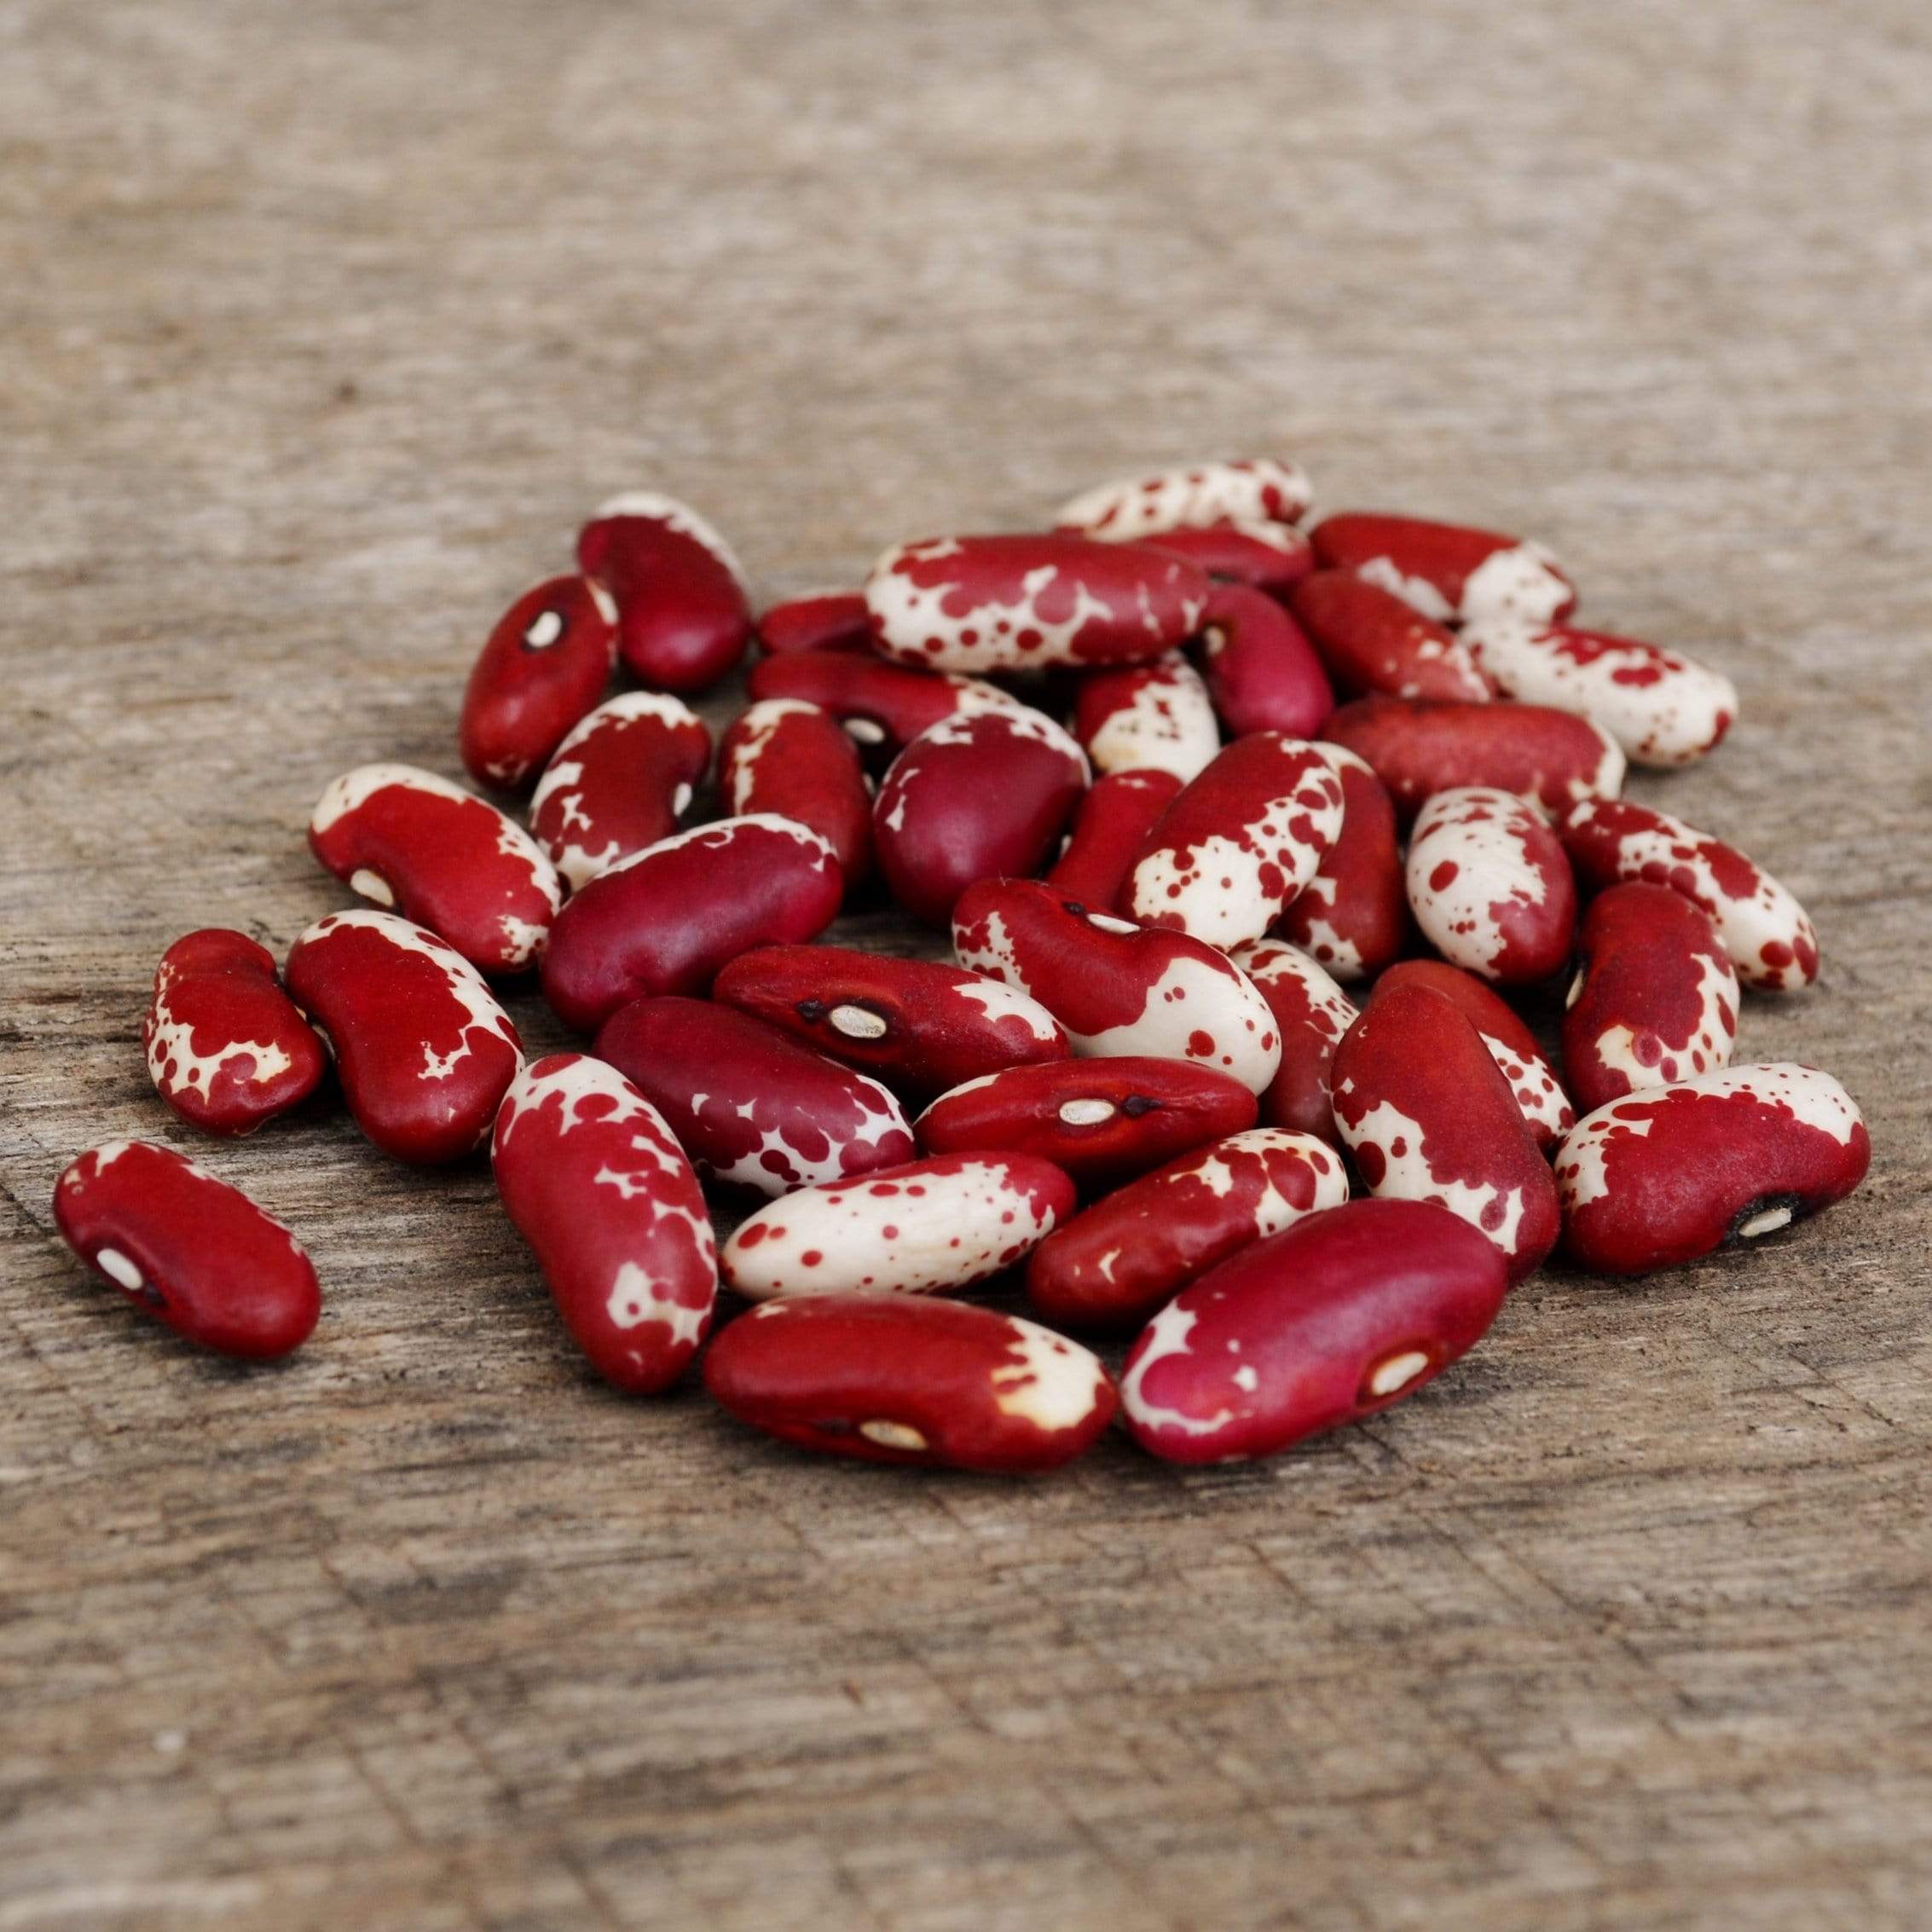 Jacob's Cattle Shelling Beans